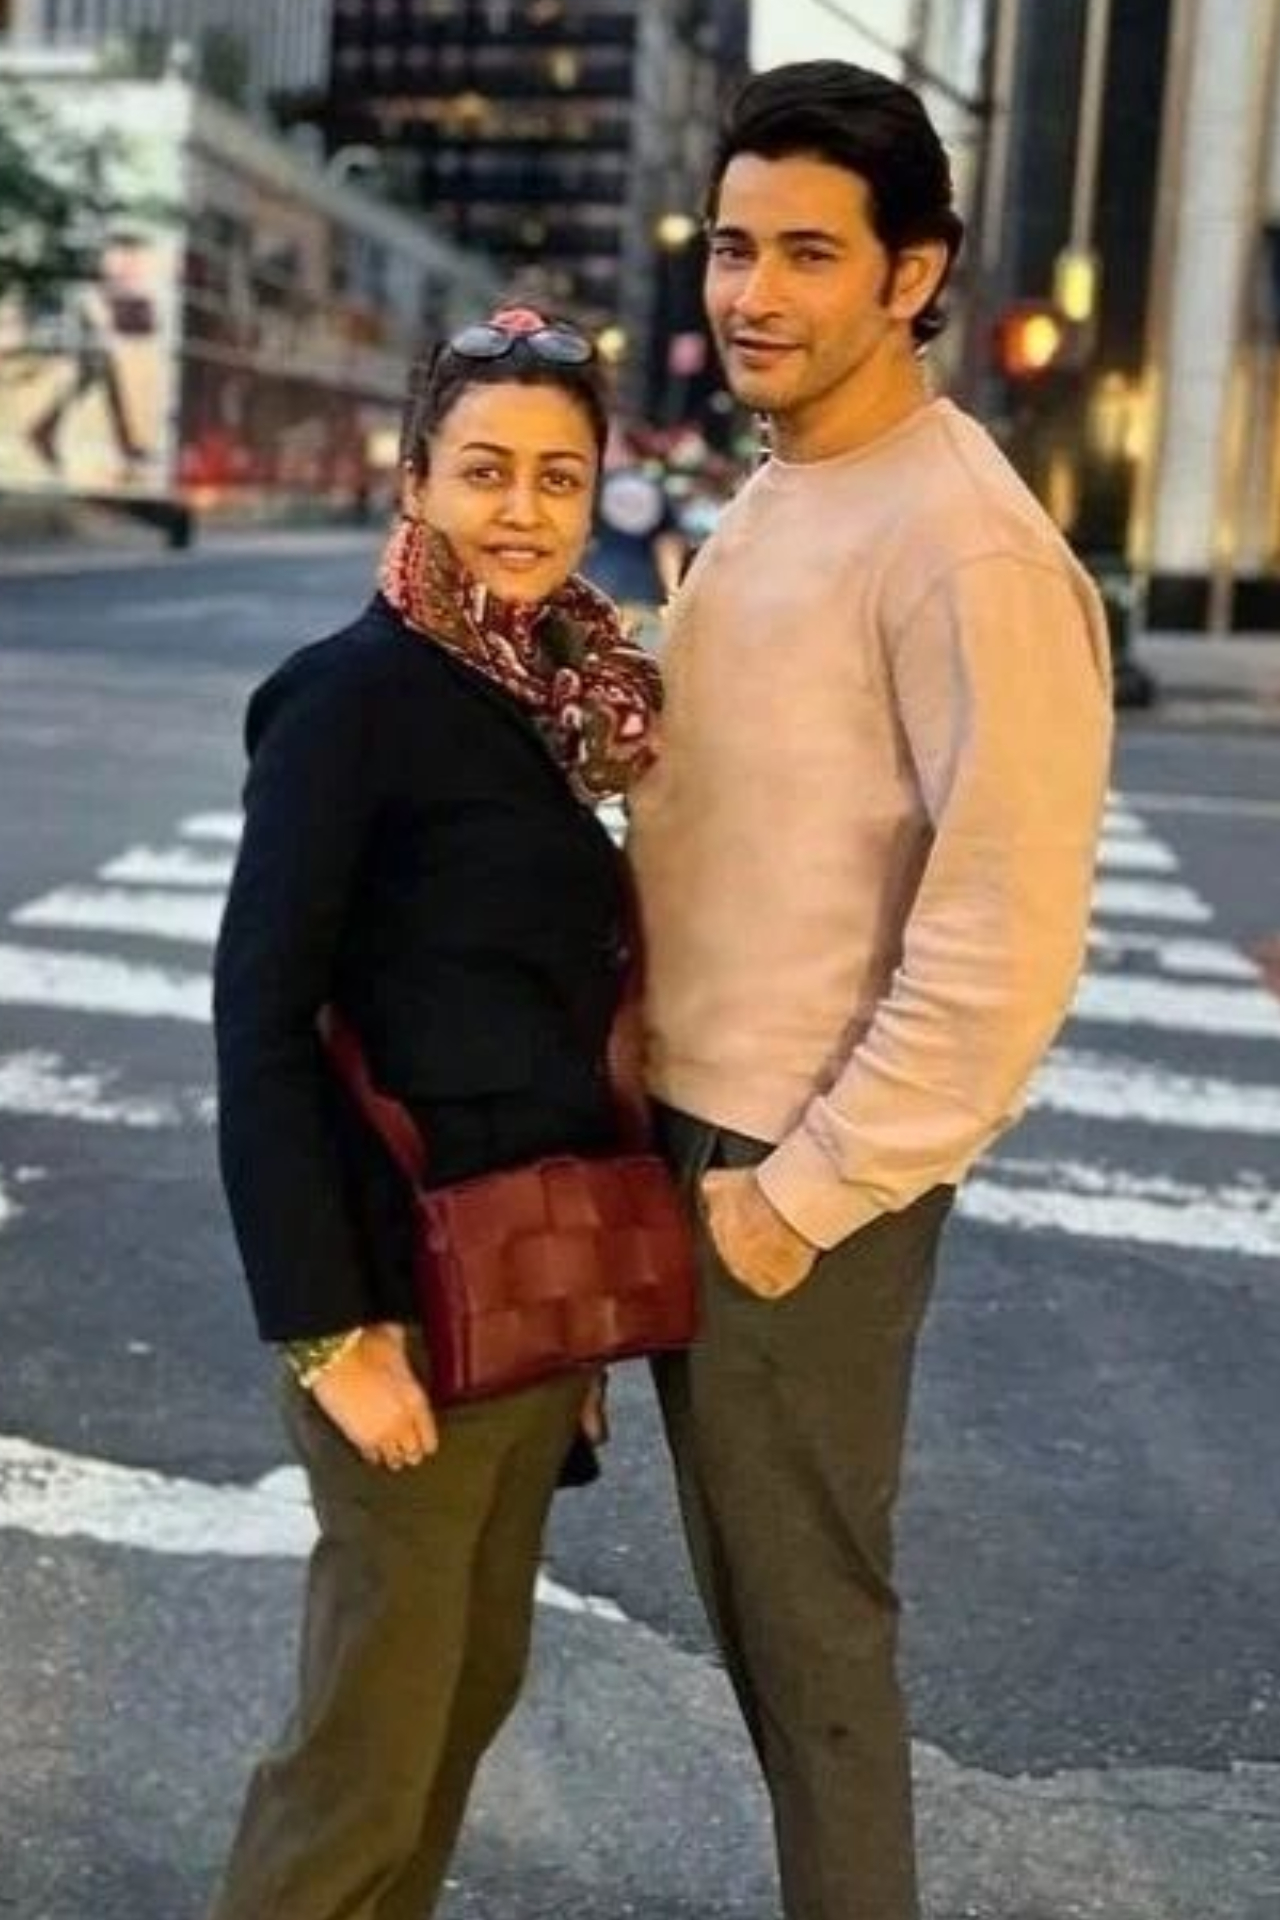 Mahesh Babu and Namrata Shirodar are made for each other, this picture proves that!